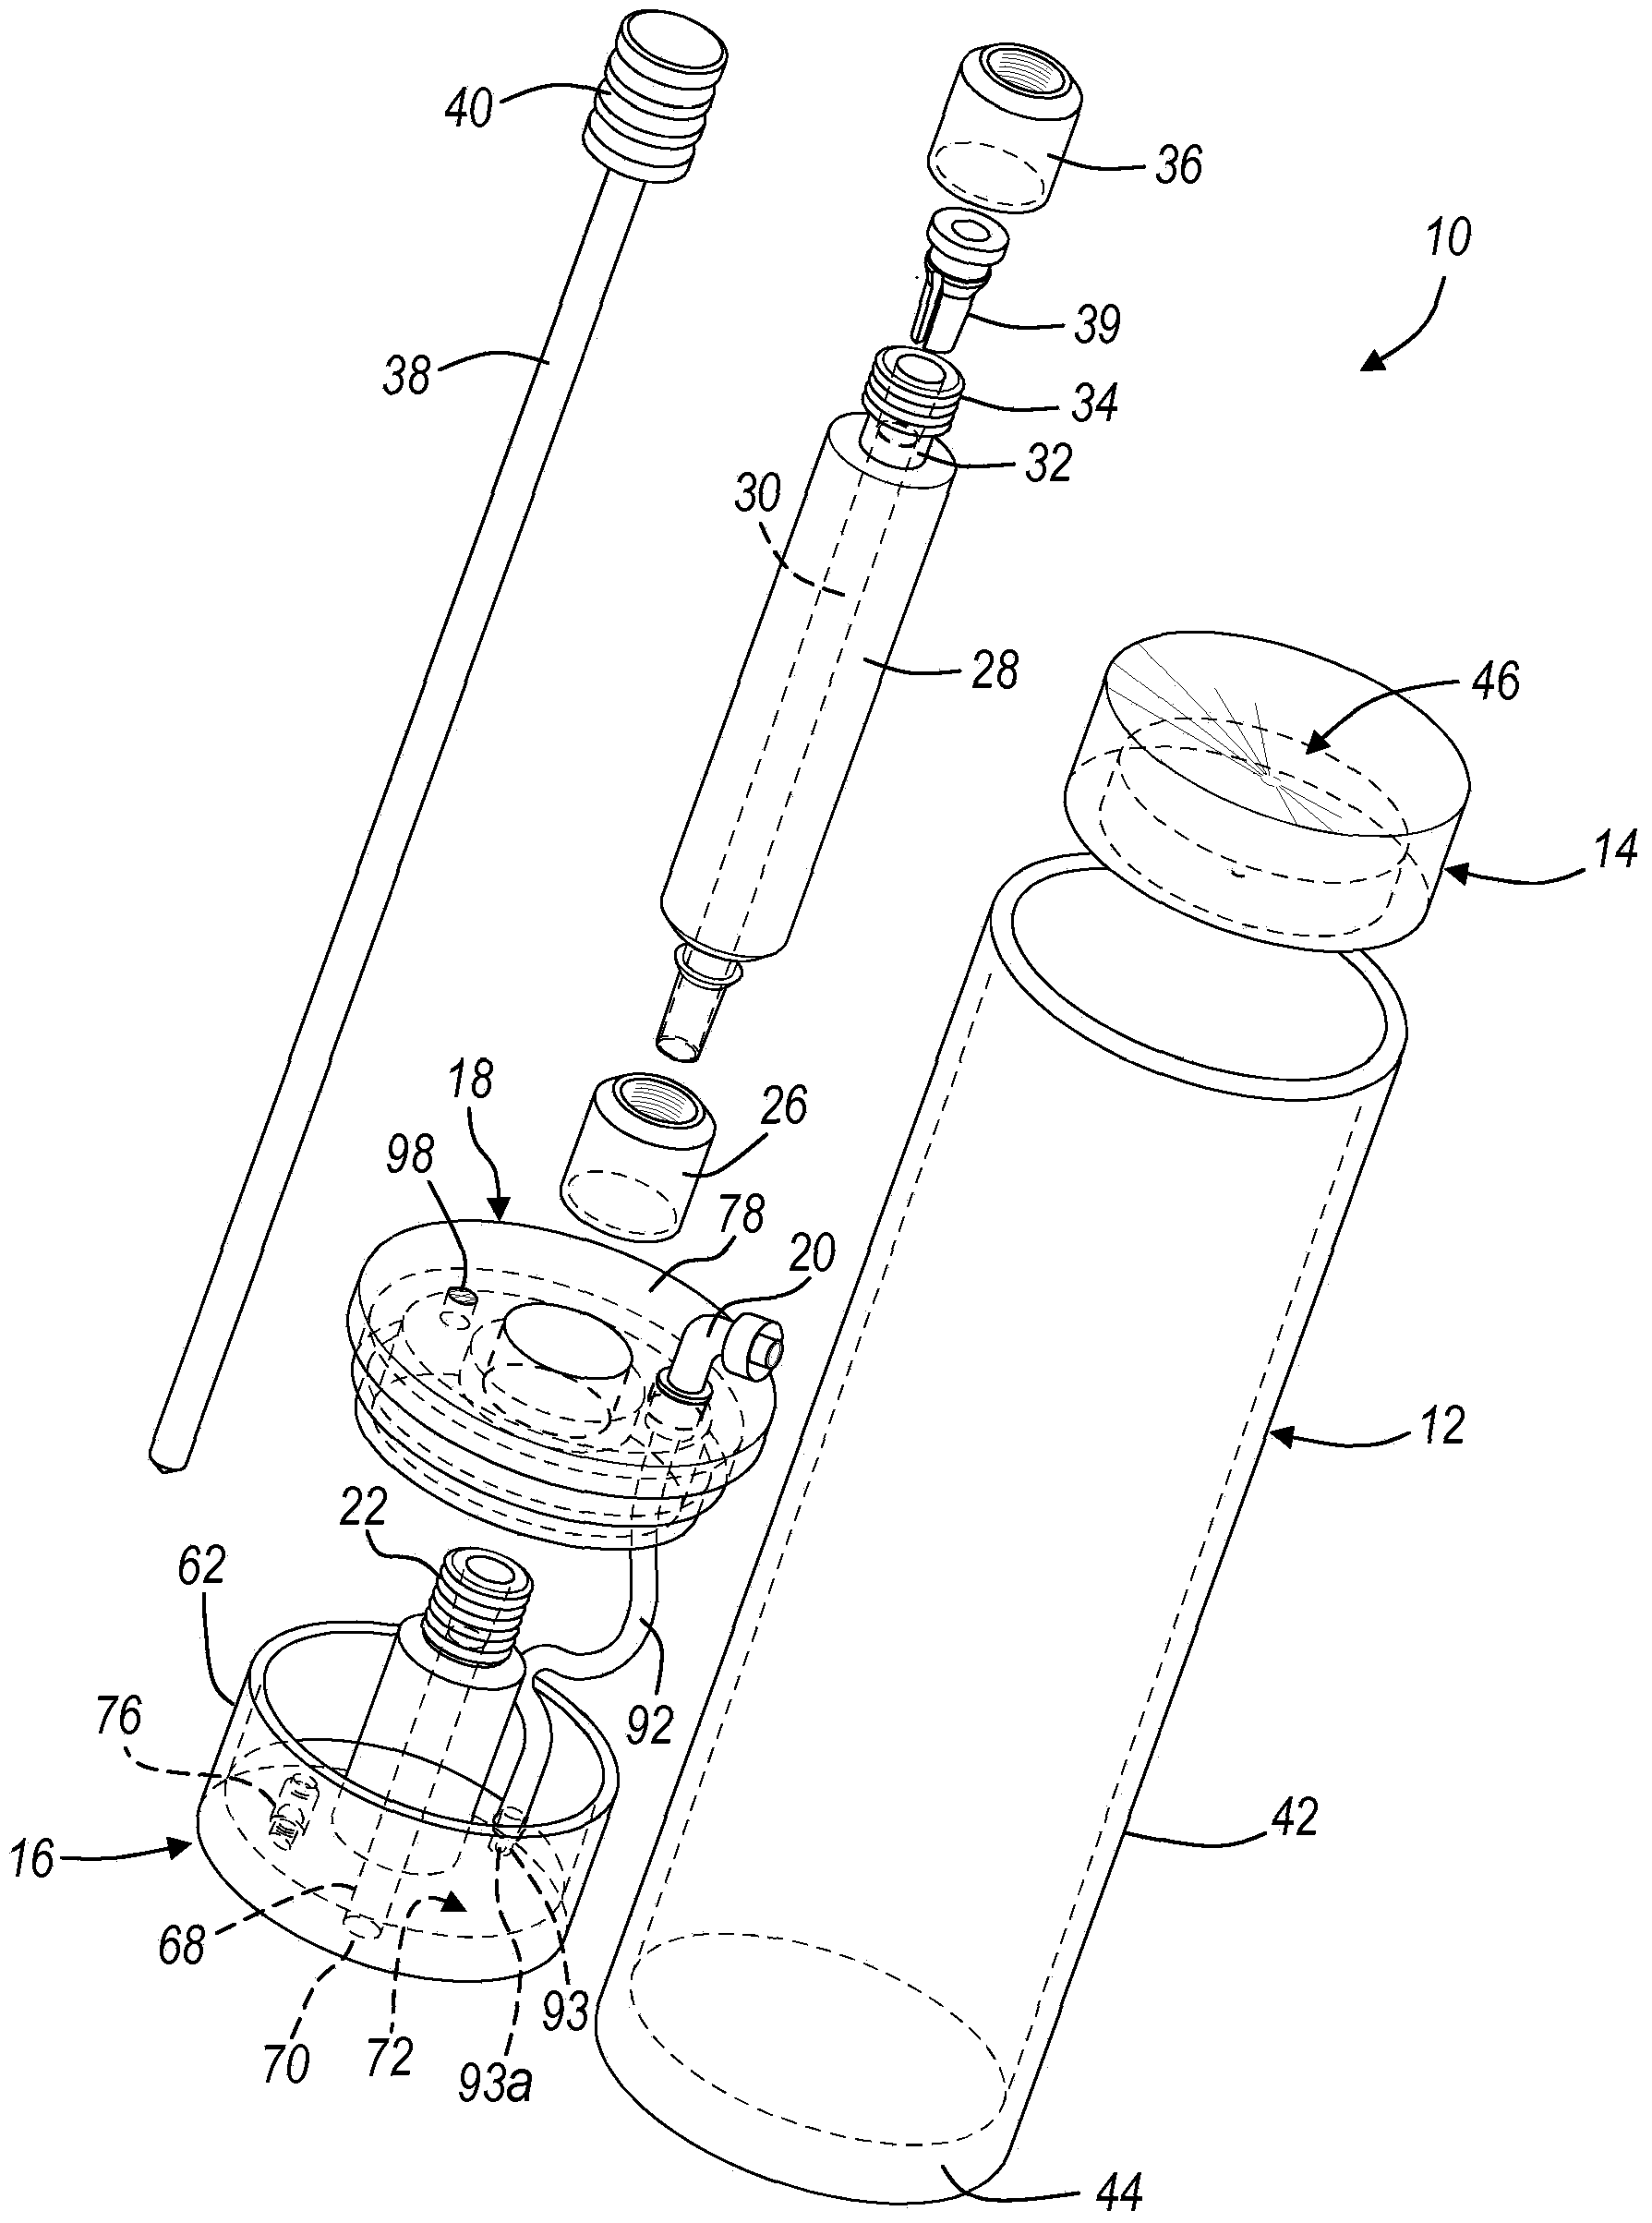 Apparatus and method for separating and concentrating fluids containing multiple components